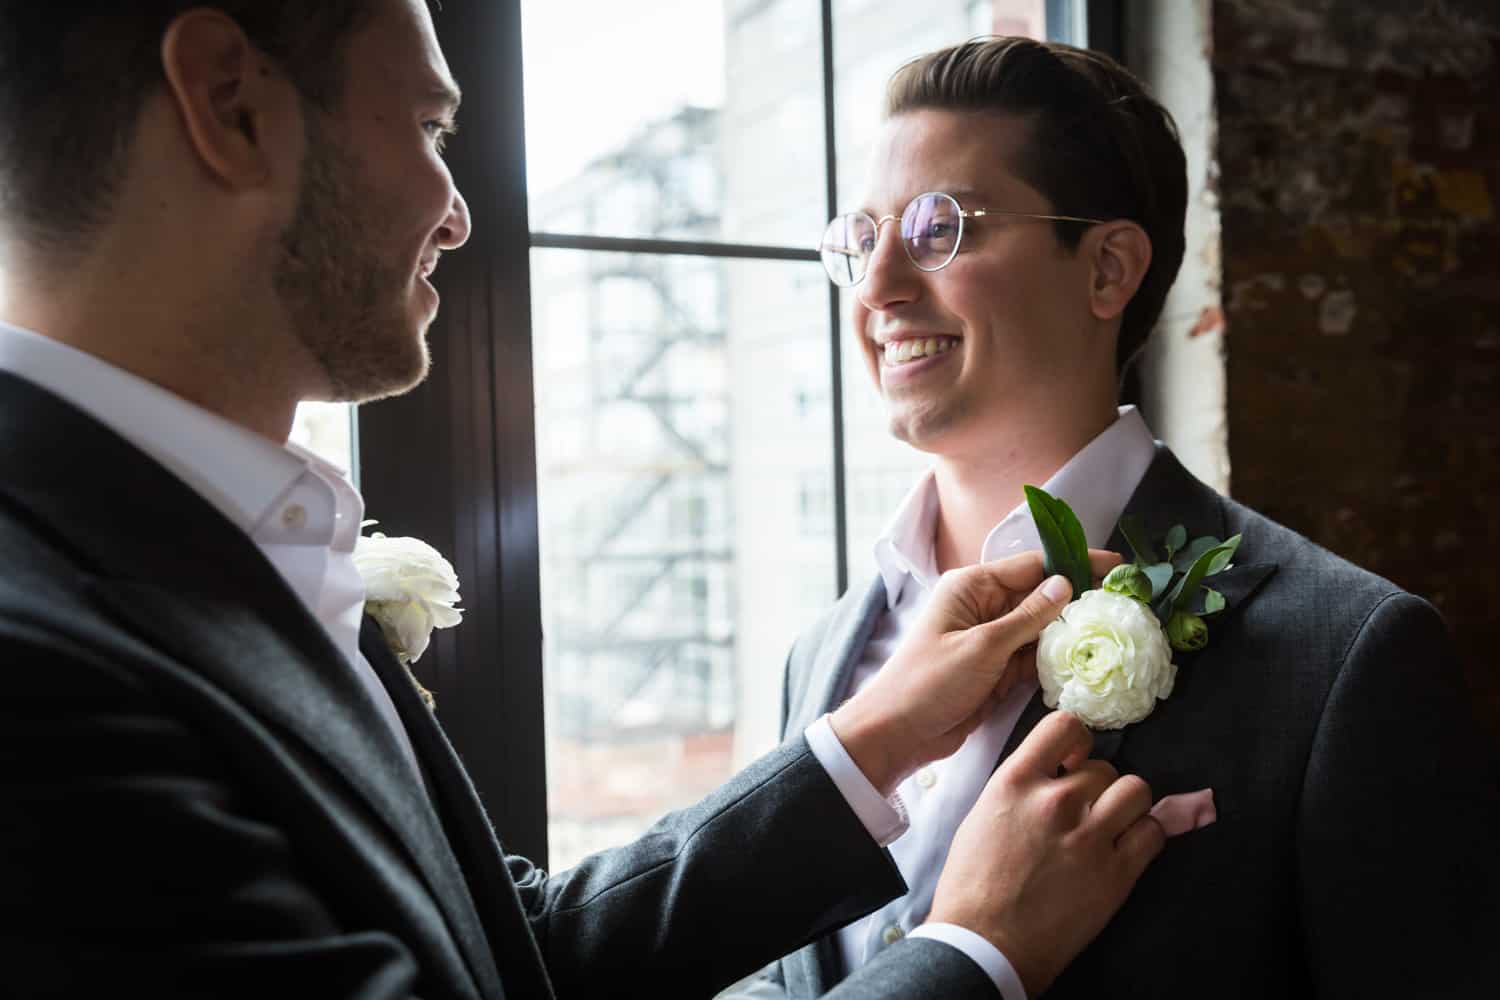 Greenpoint Loft wedding photos of groom helping other groom with his boutonniere